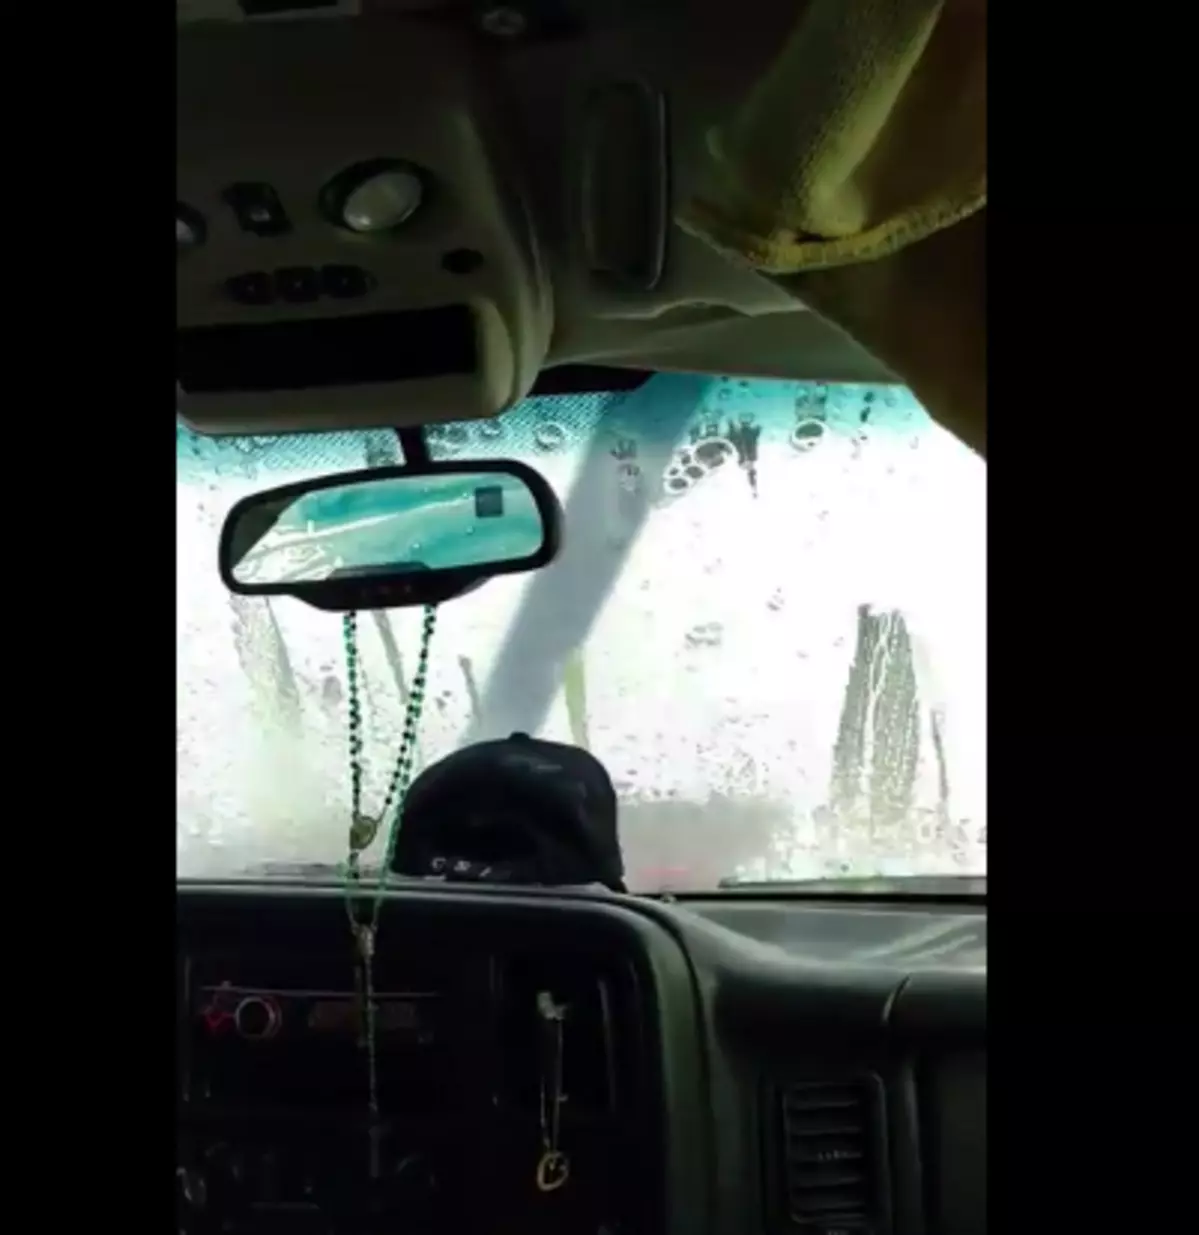 Woman Goes Through Car Wash With Open Sunroof